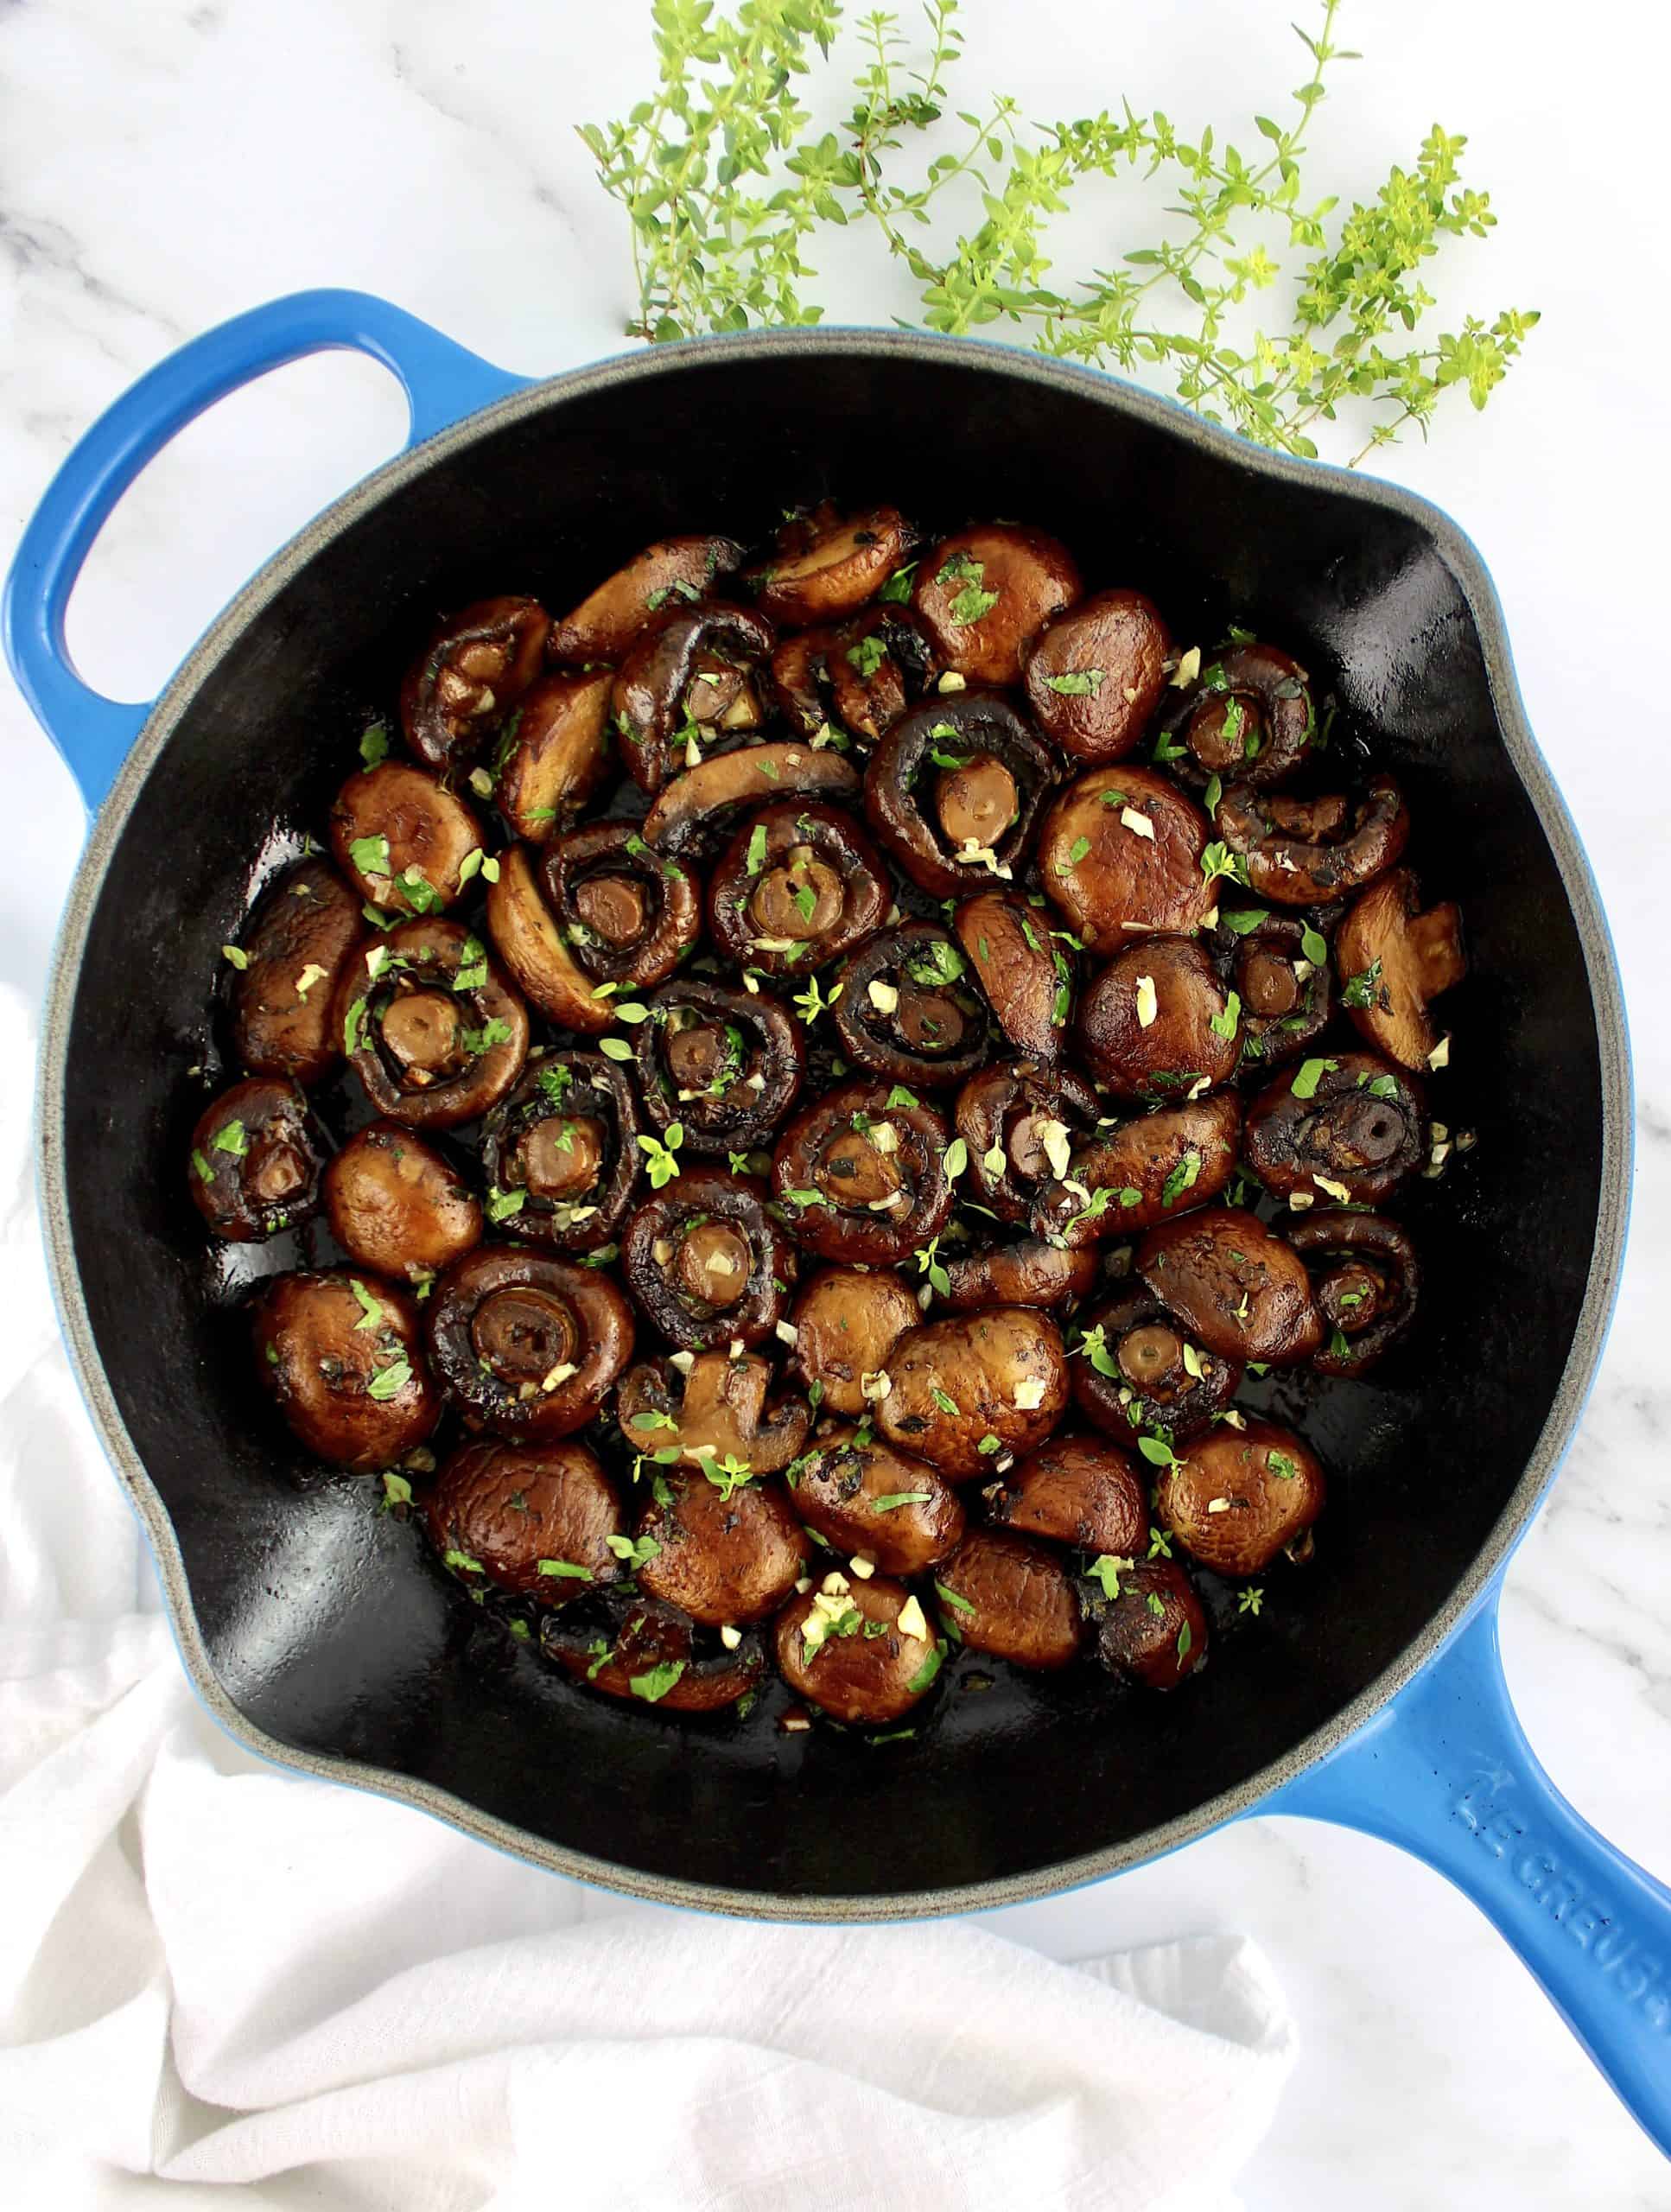 Sautéed Mushrooms in blue skillet with chopped herbs